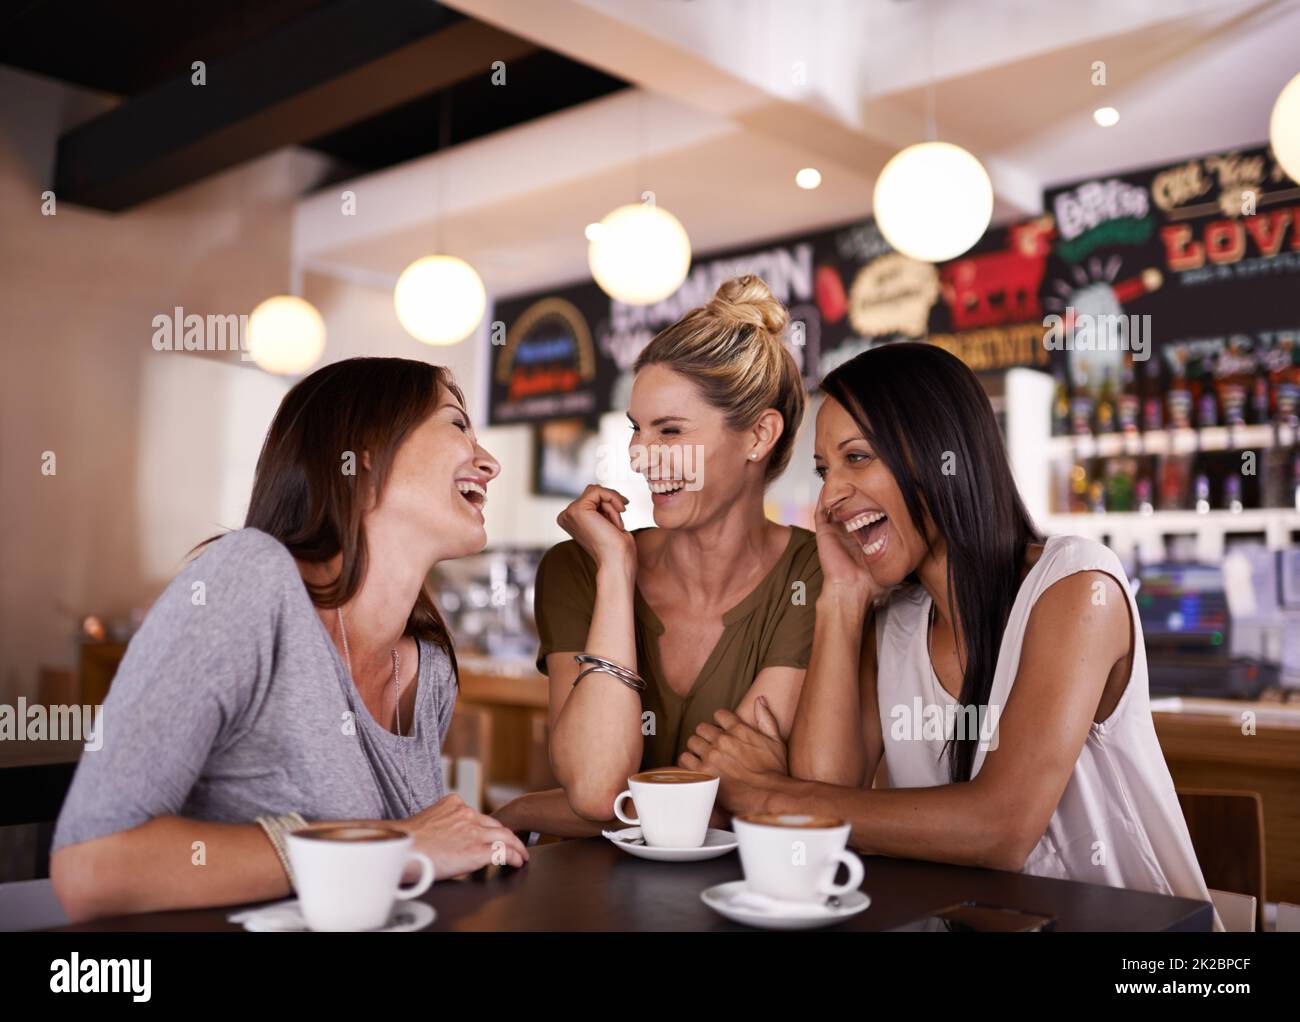 Catching up on the news. Shot of three friends having fun at a coffee shop together. Stock Photo